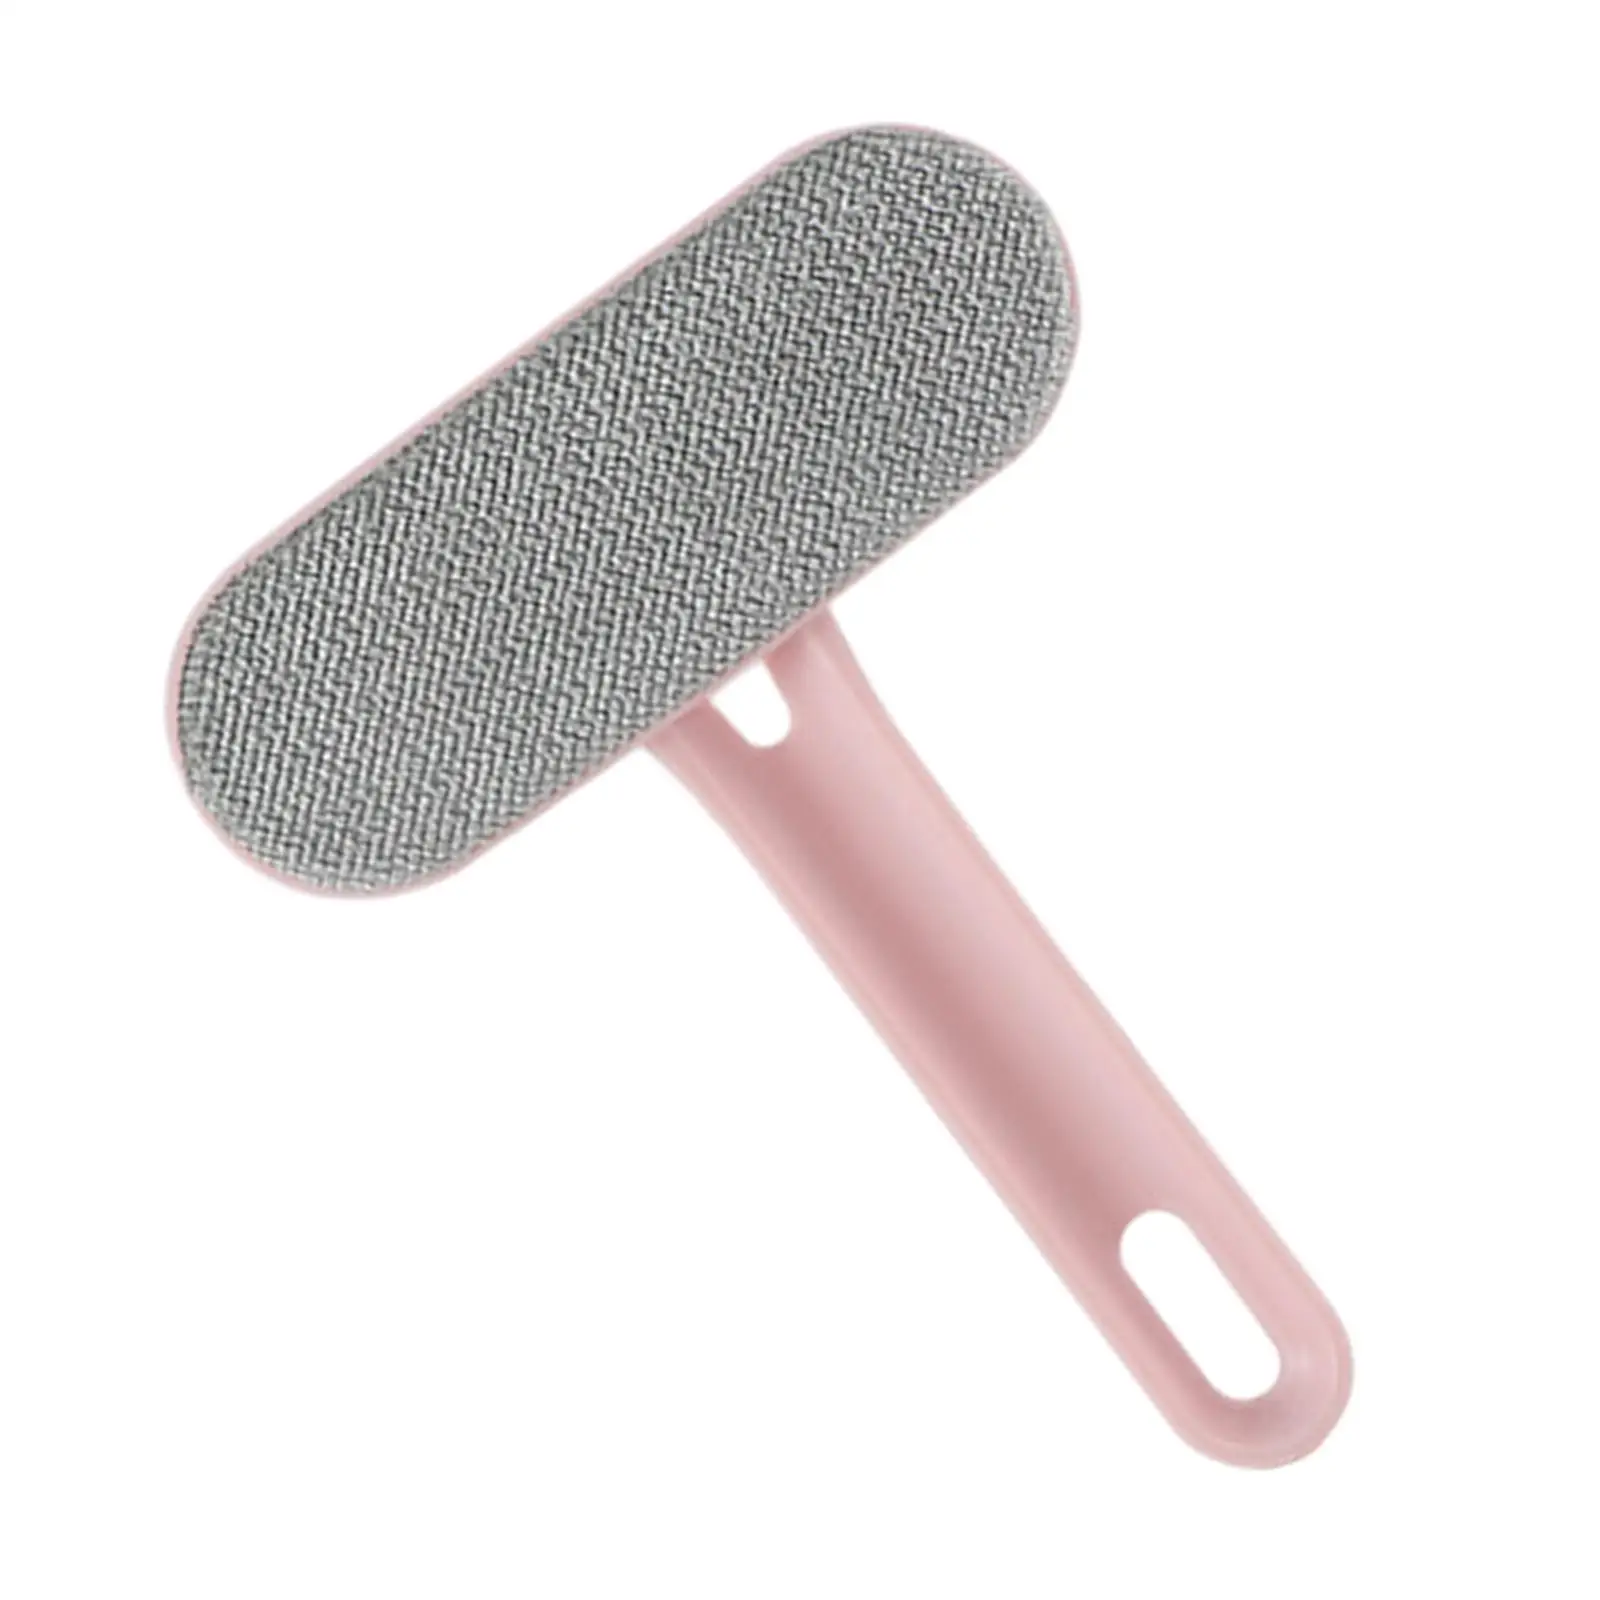 Lint Removal Brush Fabric Brush Velvet Lint Brush Coat Lint Brush Clothes Fuzz Remover for Garment Clothing Sofa Couch Bedding